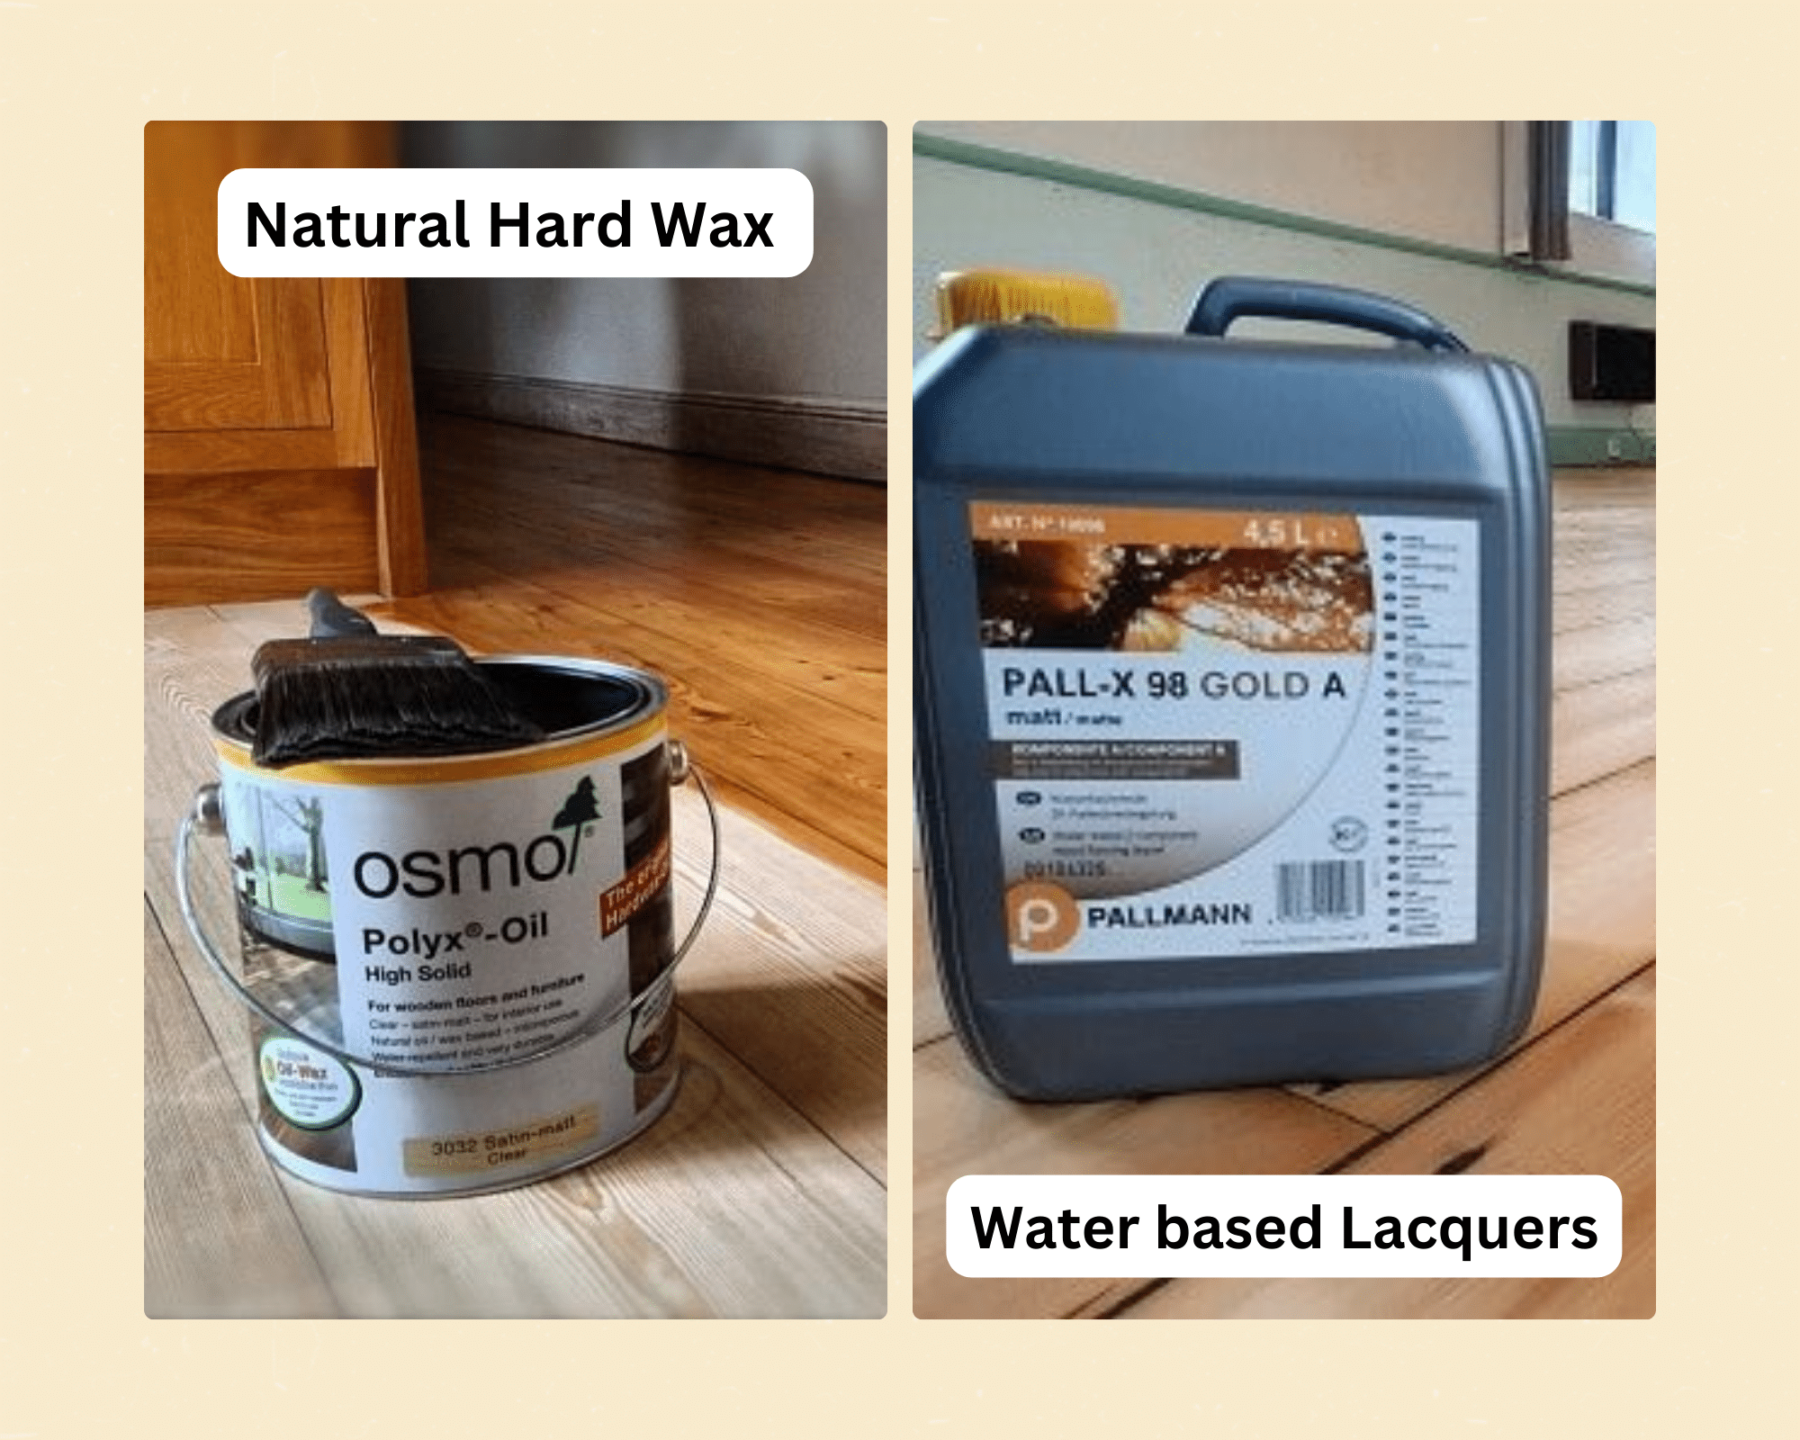 difference between Natural Hardwax and Water-based Lacquers